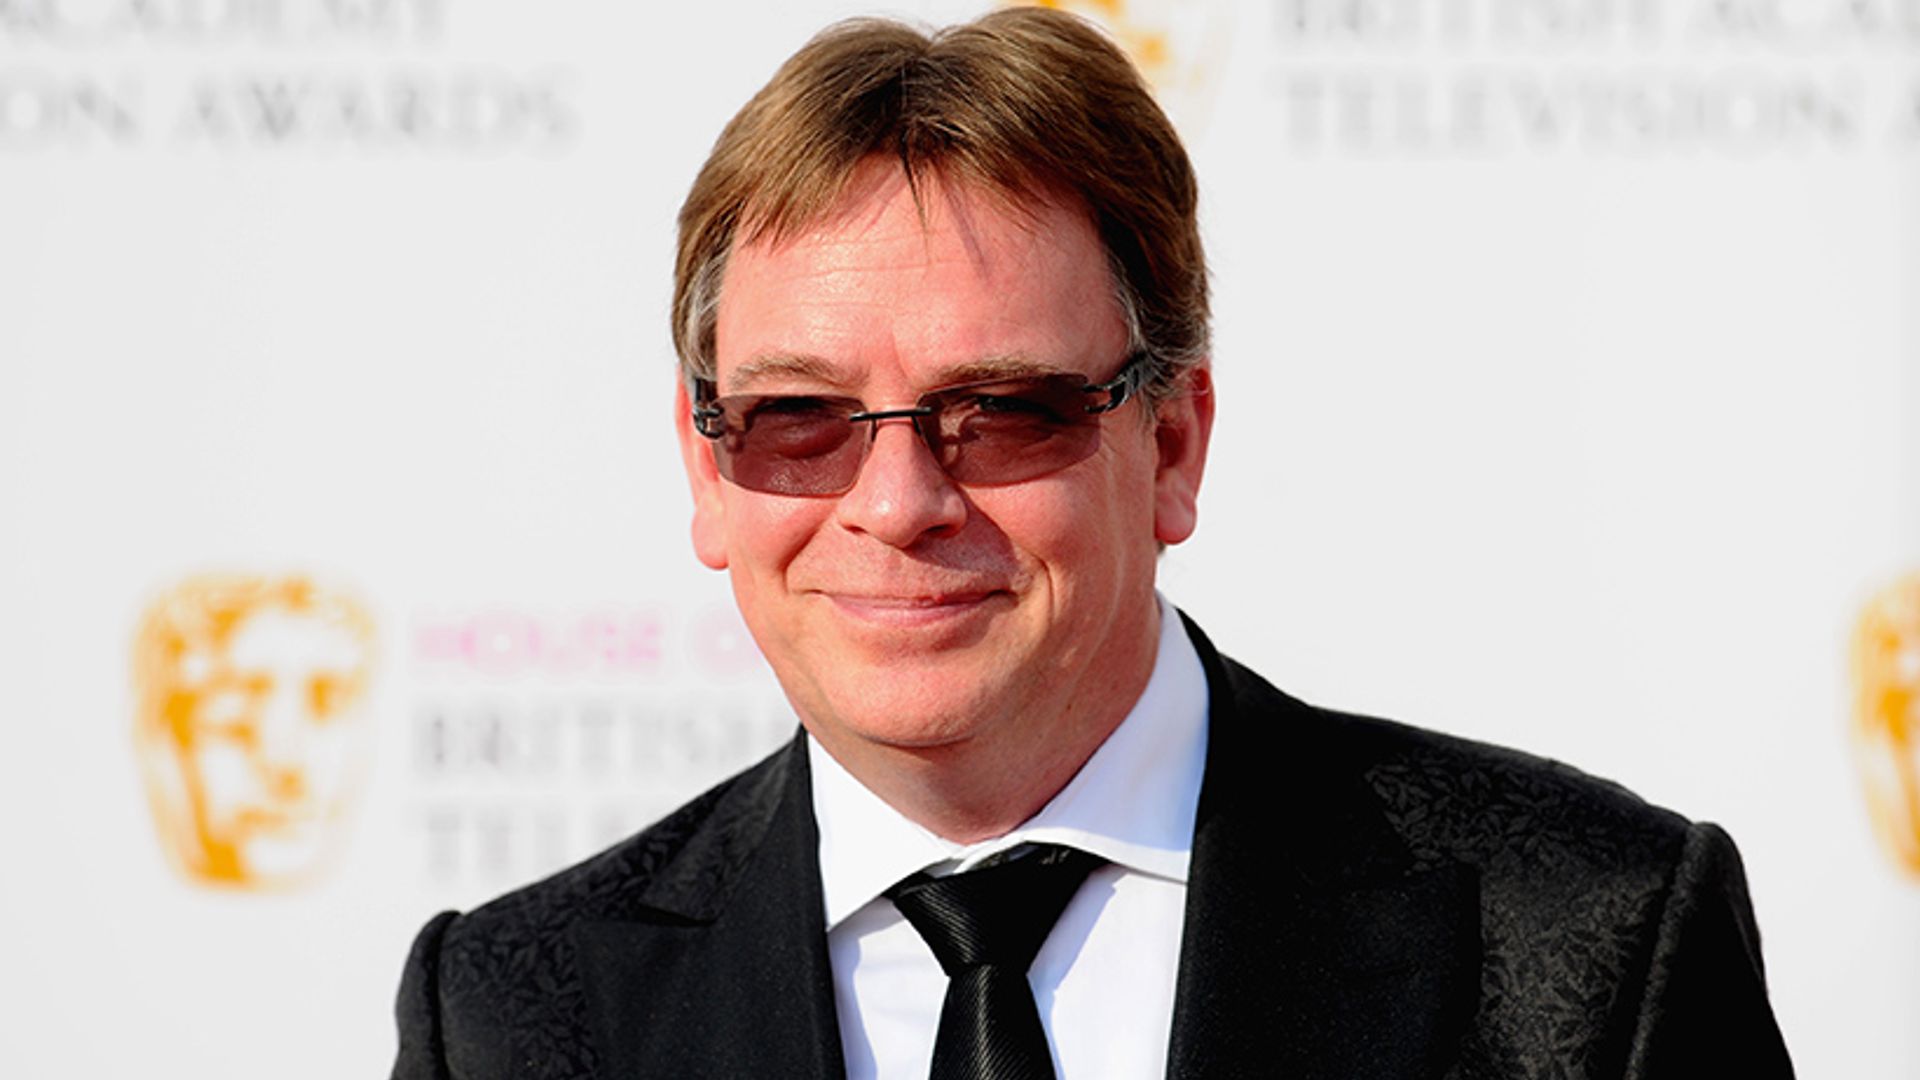 EastEnders actor Adam Woodyatt reveals son had to be put in a coma after horrific car accident